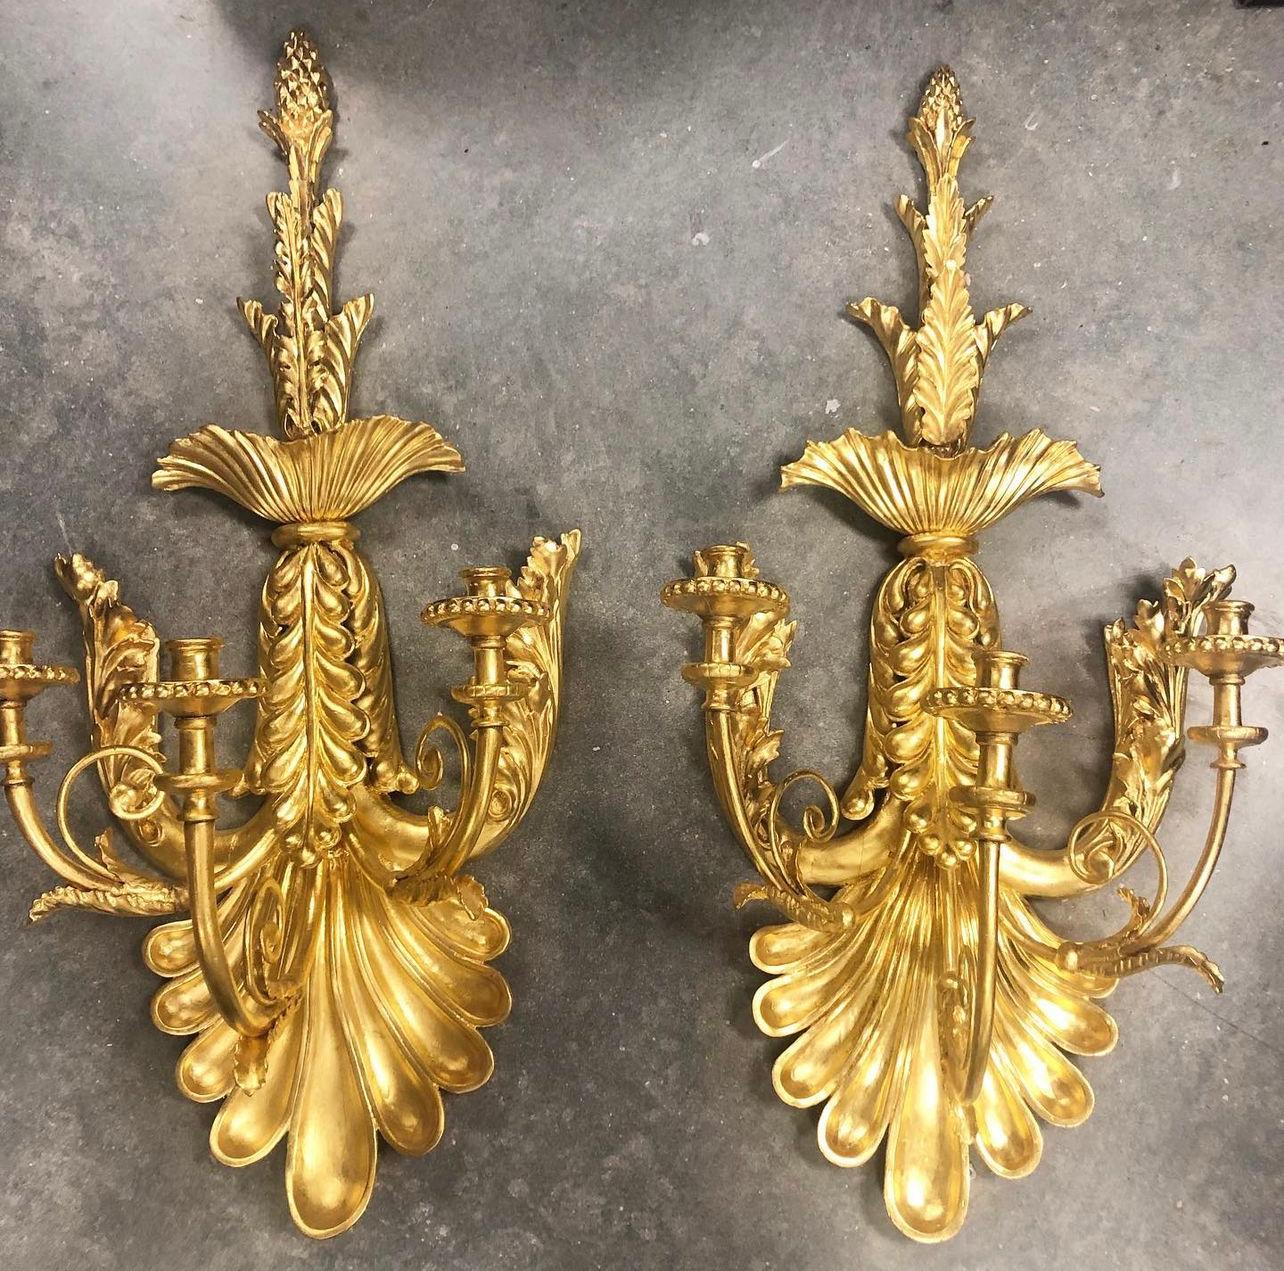 Hand-Carved Italian Gilt Wood and Gesso Wall Sconces For Sale